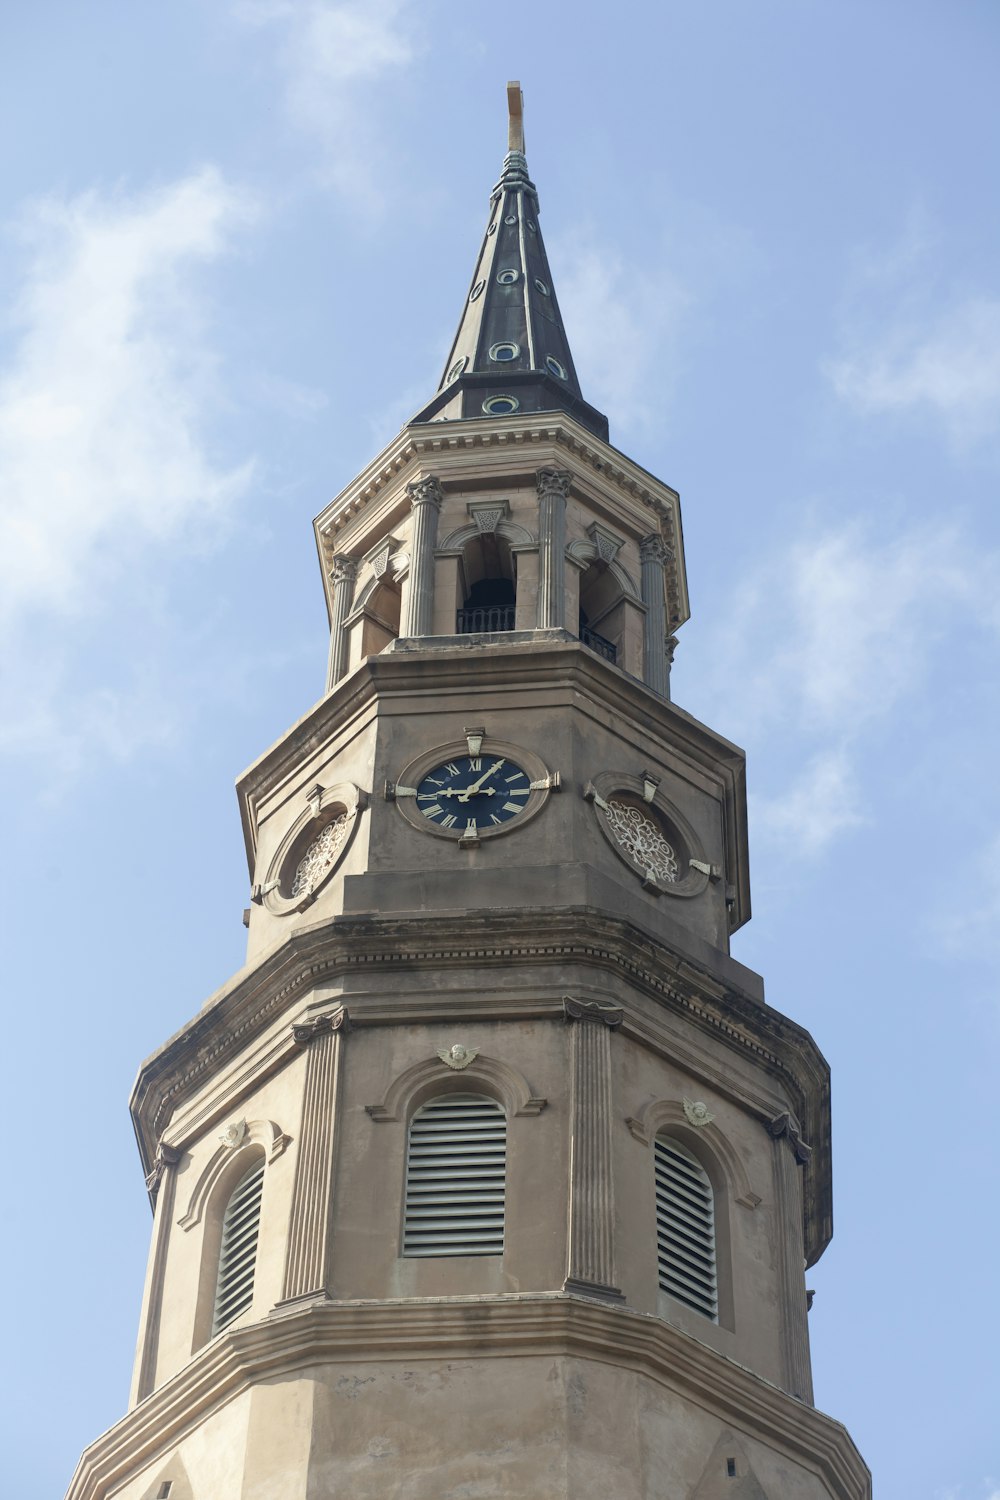 tower with clock